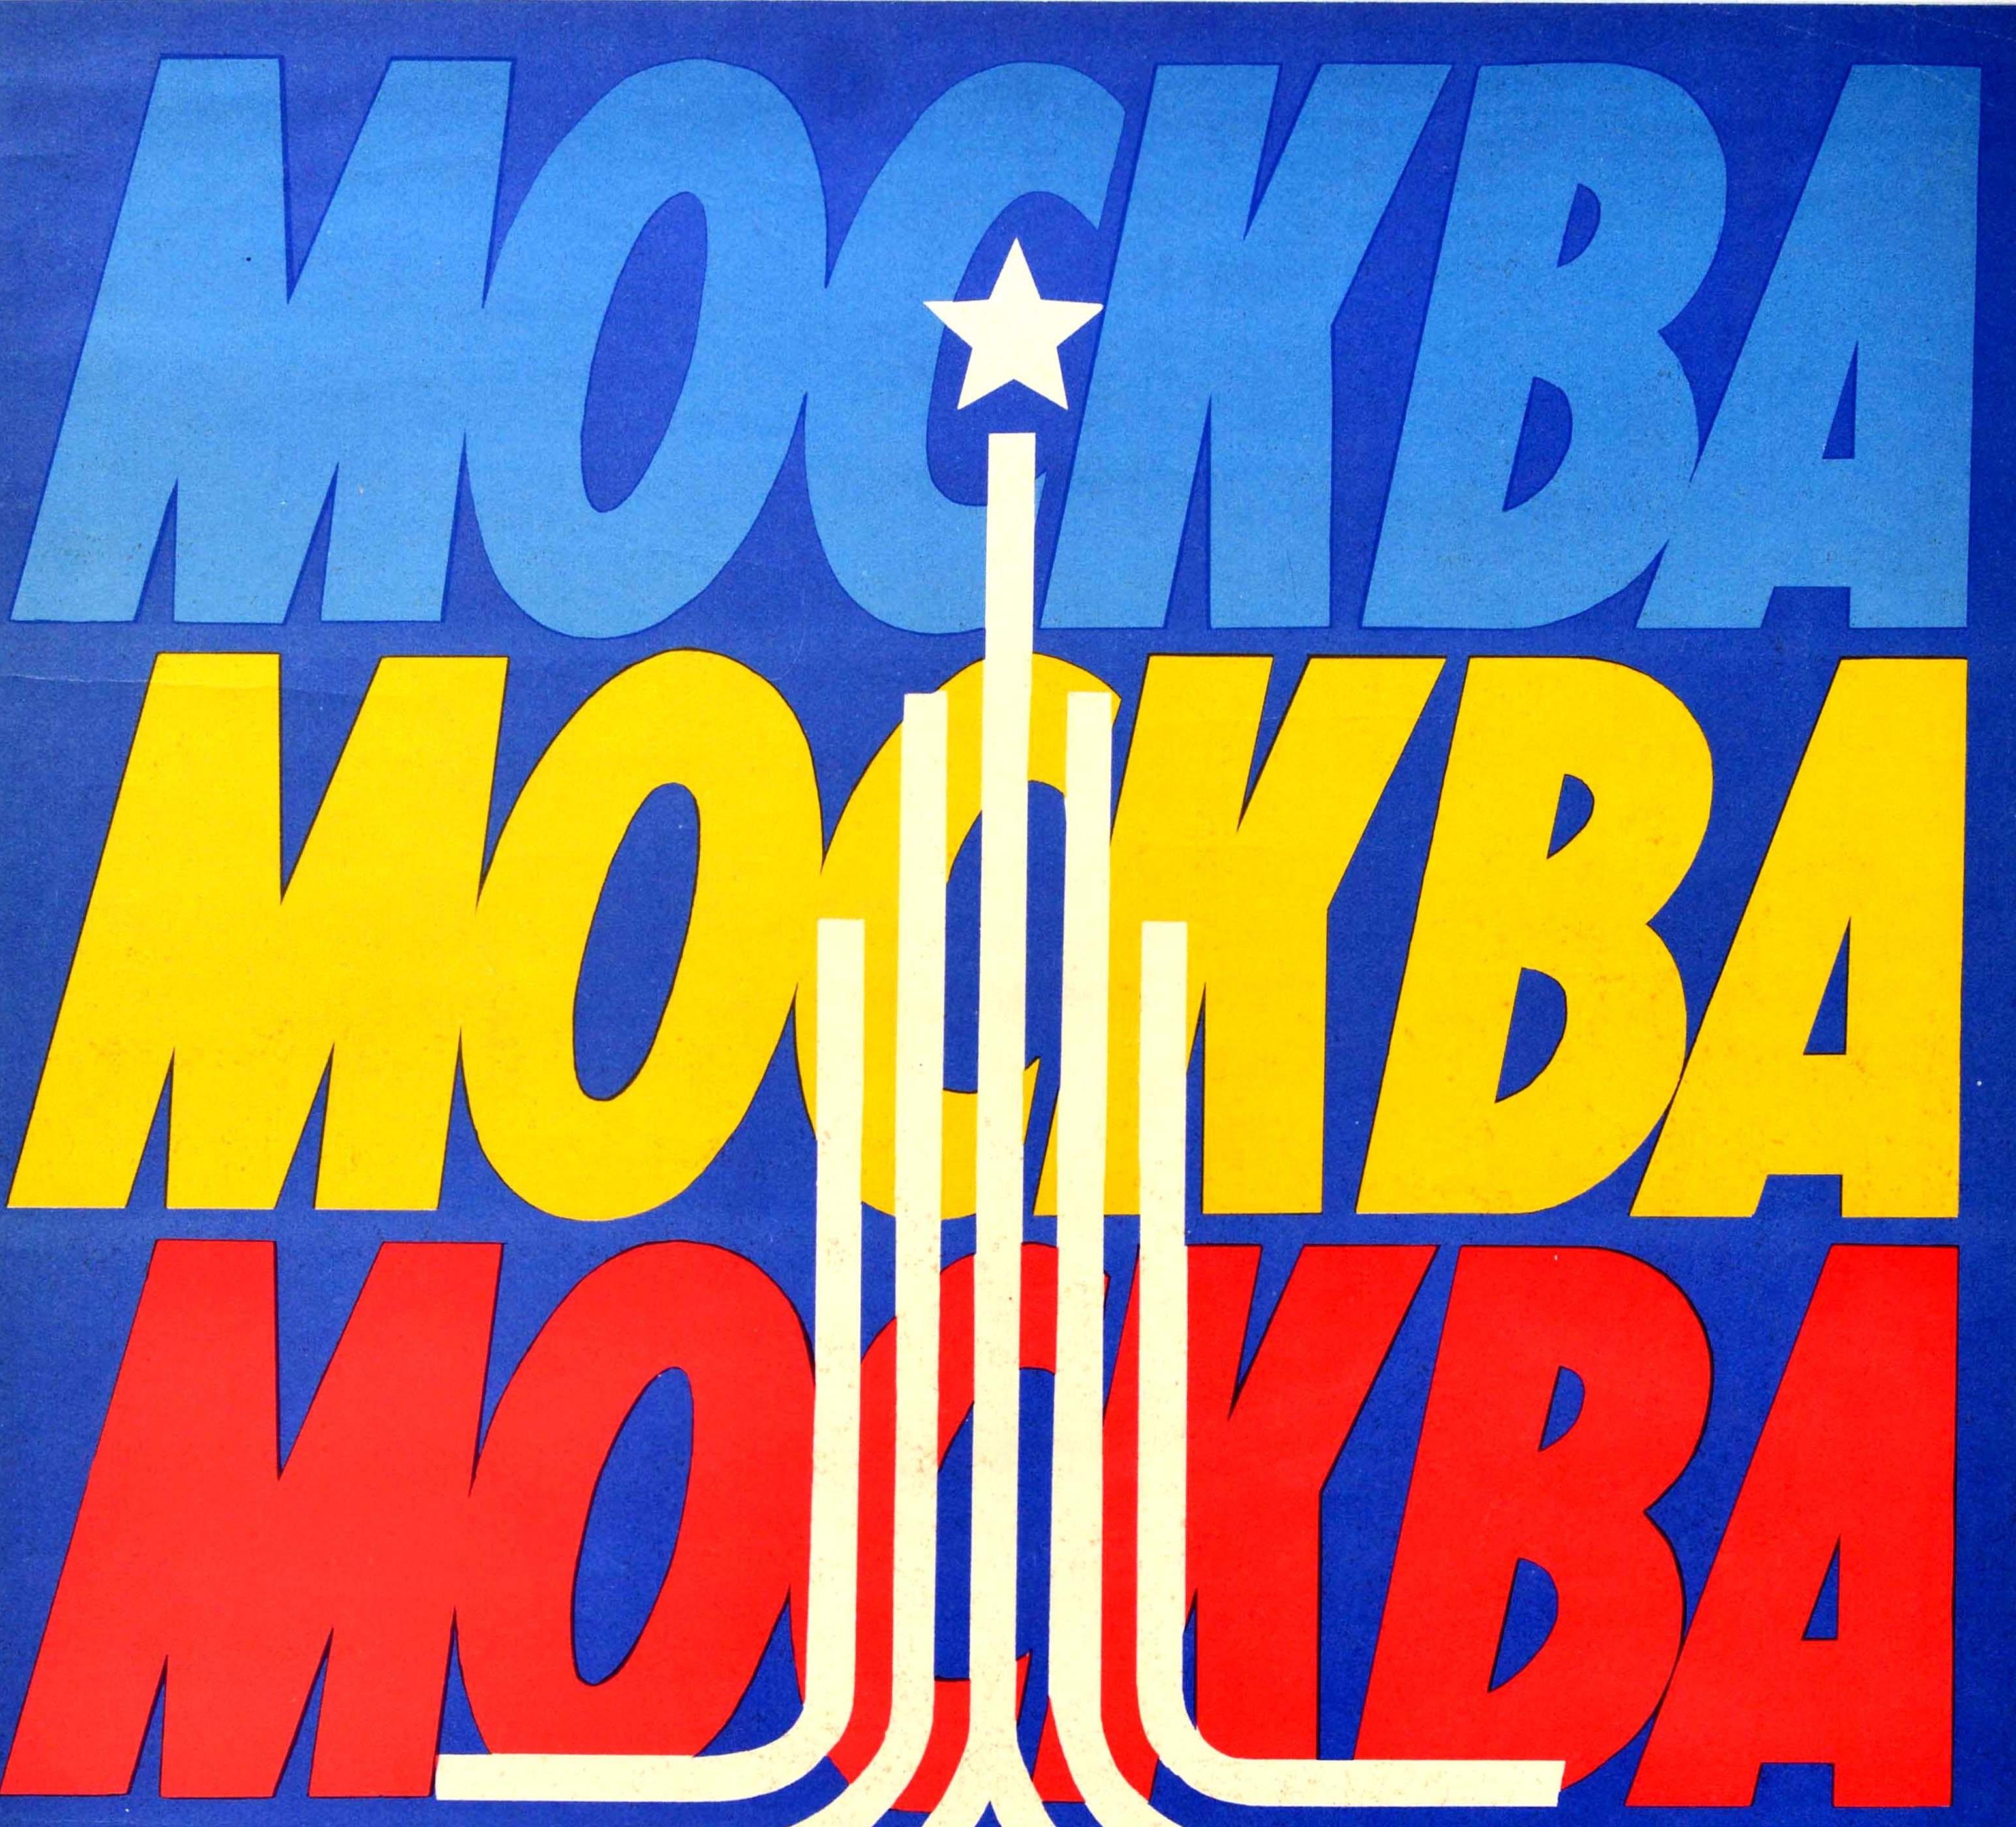 Original vintage sport poster promoting the 22nd Summer Olympic Games / Games of the XXII Olympiad in 1980 held in Moscow Russia featuring the title ?????? / Moskva / Moscow in bold lettering in light and dark blue, yellow, green and red against a